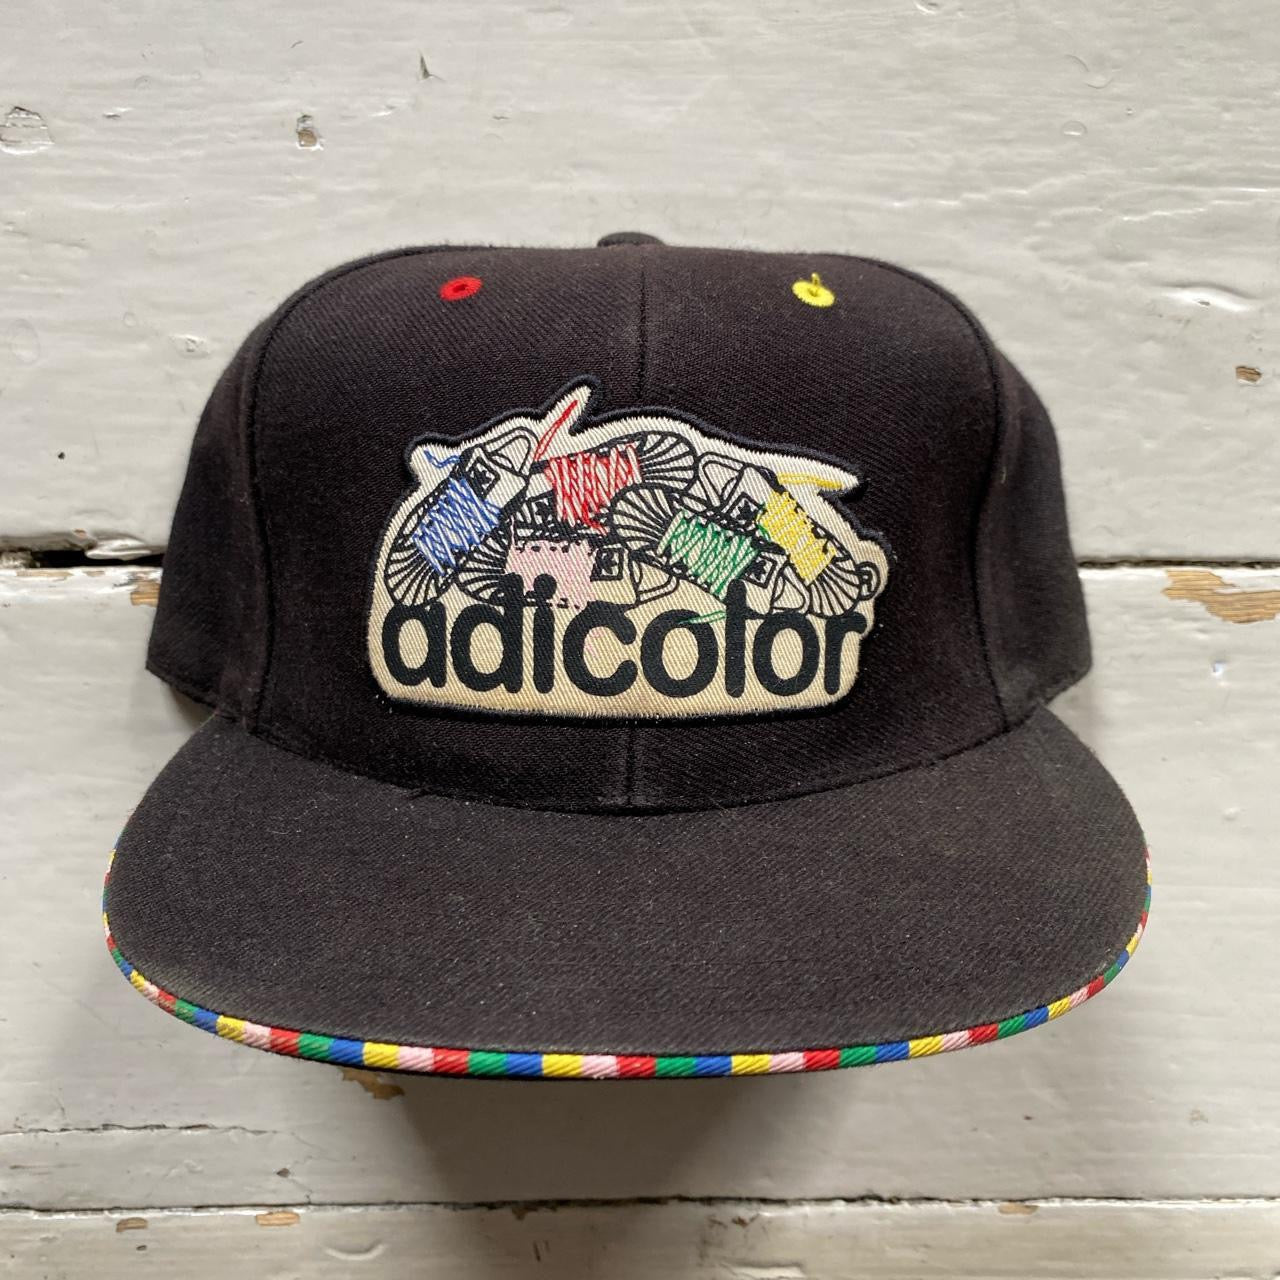 Adidas Adicolor Vintage Fitted Cap (Large)